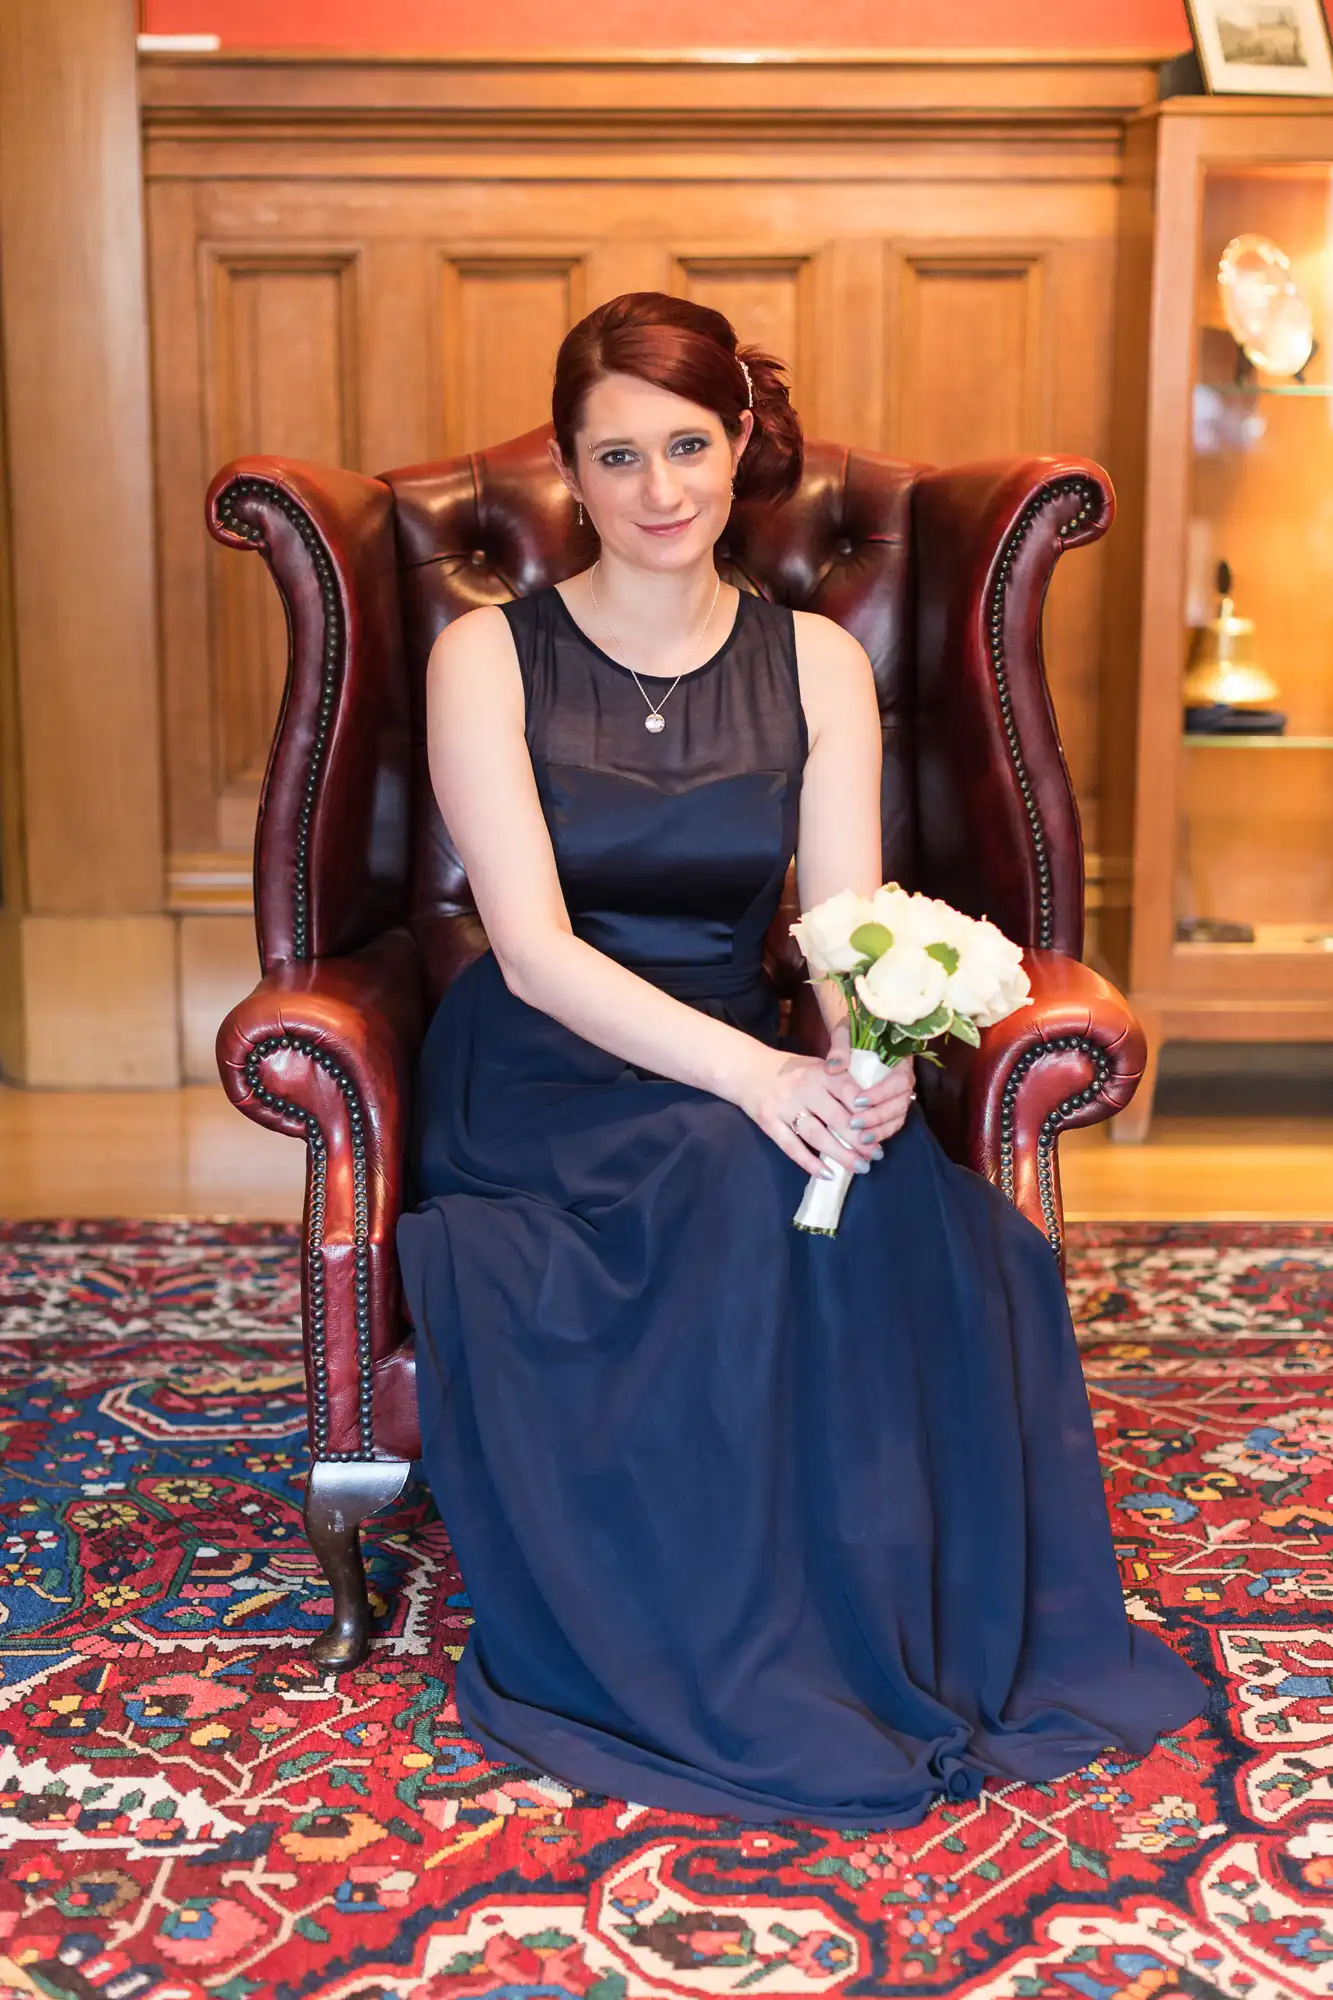 A woman in a navy blue gown sits on a vintage chair, holding a bouquet of white roses, with a patterned carpet beneath her.